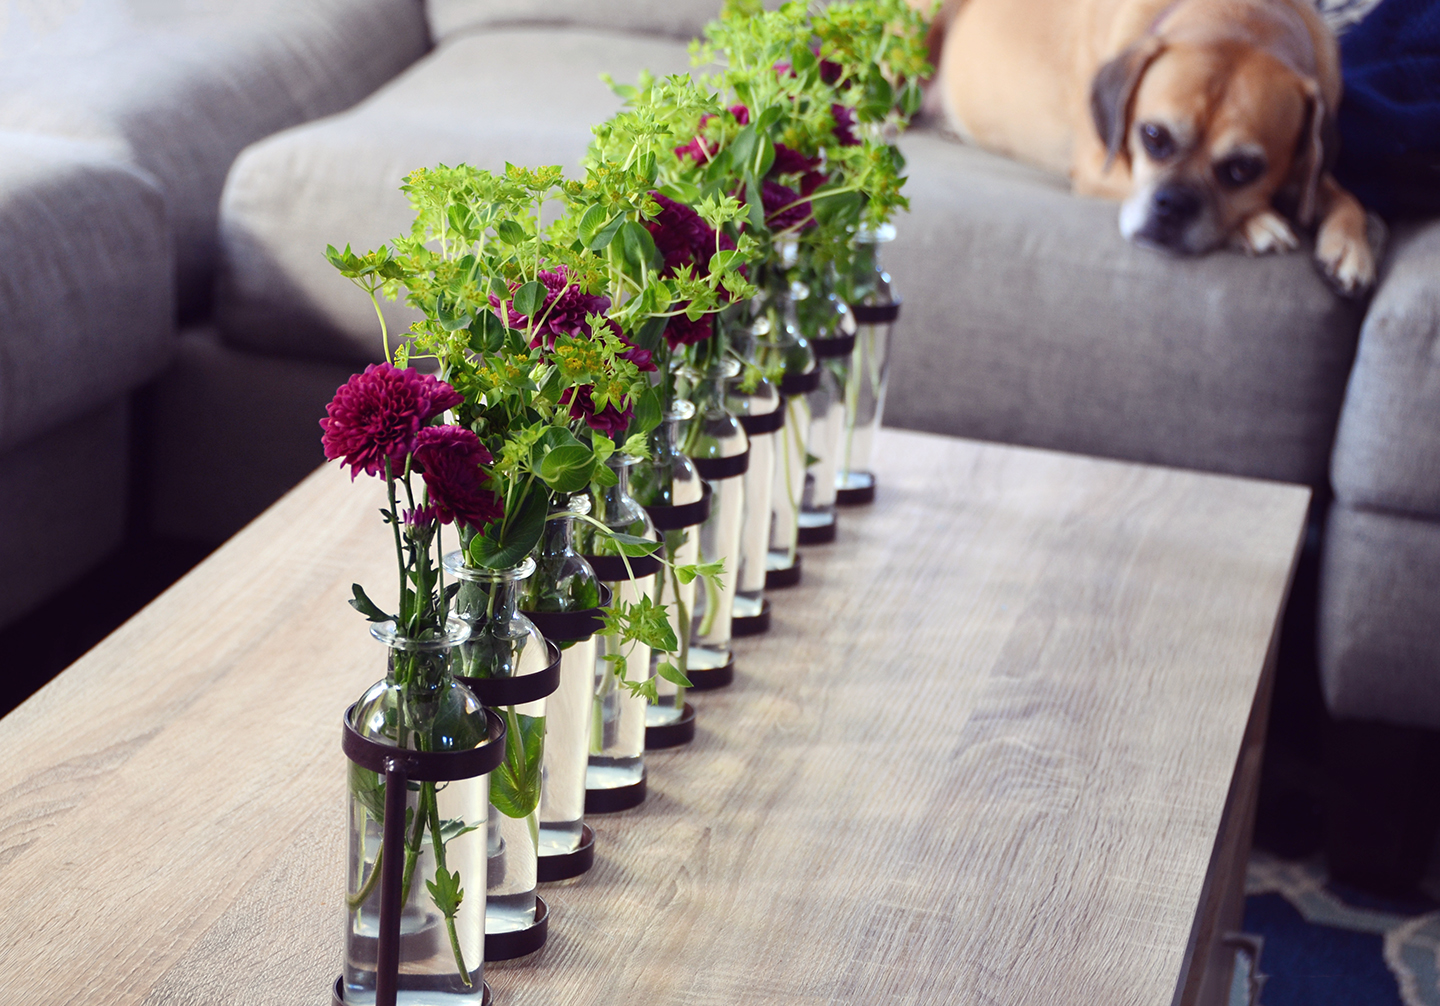 How To Make a Beautiful Centerpiece With Grocery Store Flowers /// By Design Fixation #entertaining #floral #affordable